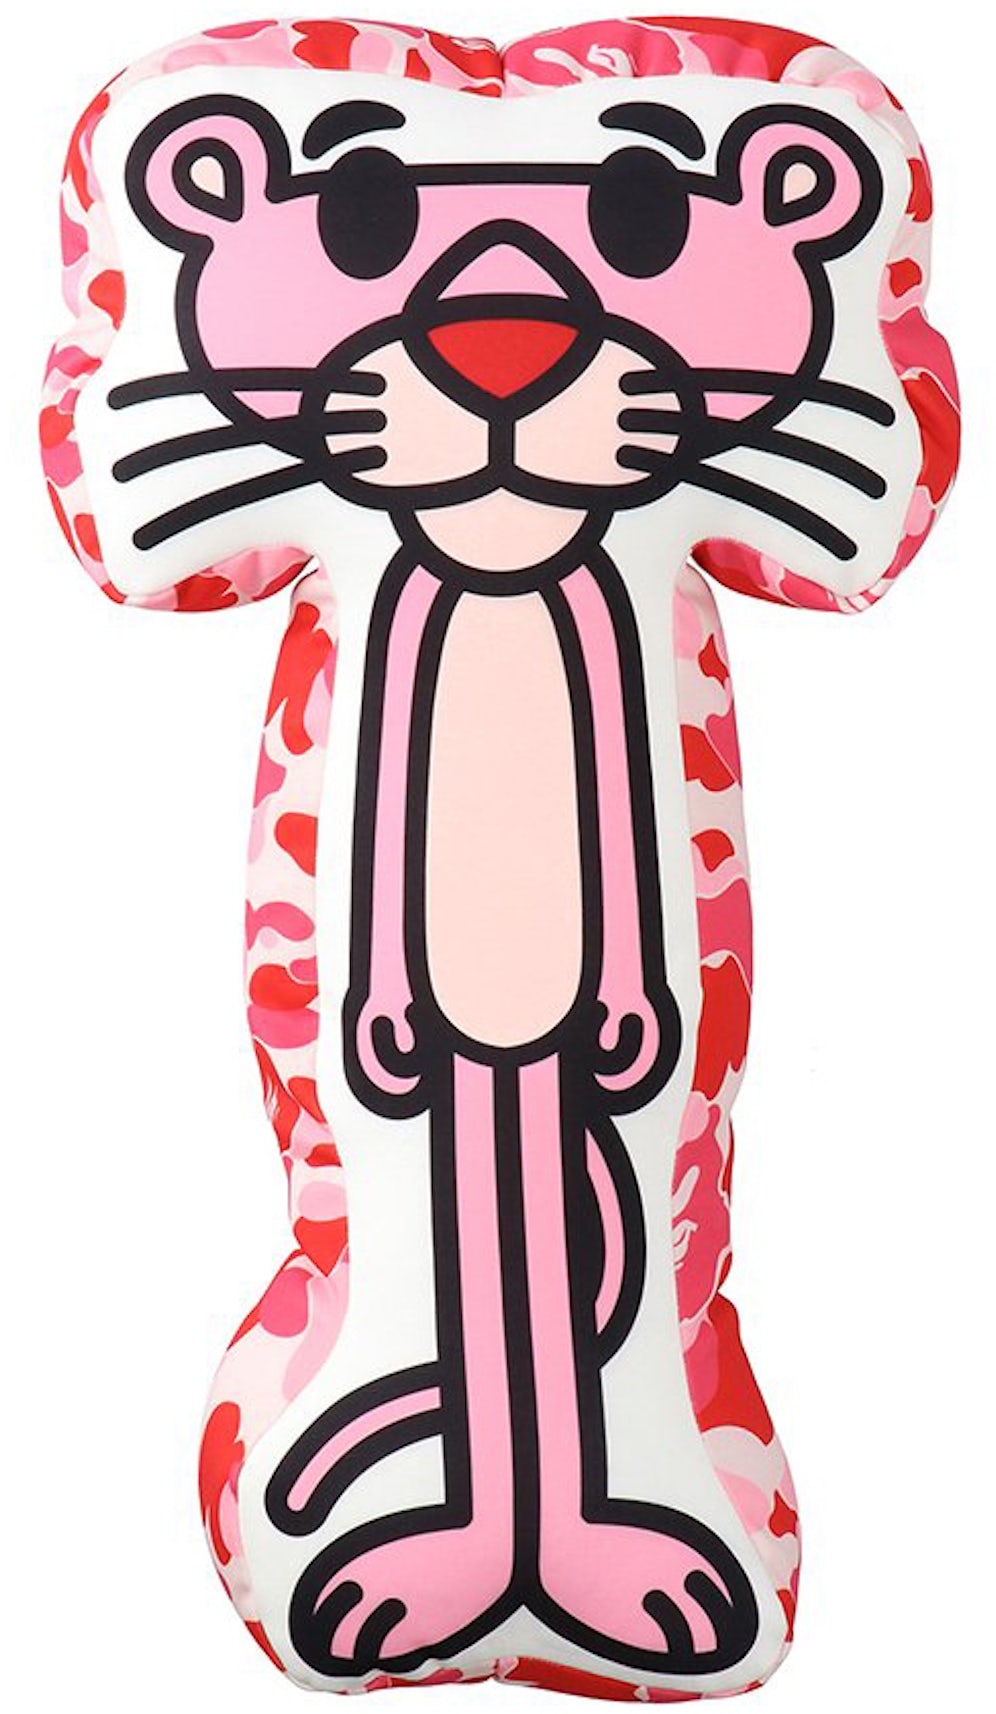 https://images.stockx.com/images/BAPE-x-Pink-Panther-Baby-Milo-Fluffy-Beads-Cushion-Set-Multi.jpg?fit=fill&bg=FFFFFF&w=1200&h=857&fm=jpg&auto=compress&dpr=2&trim=color&updated_at=1634580116&q=60